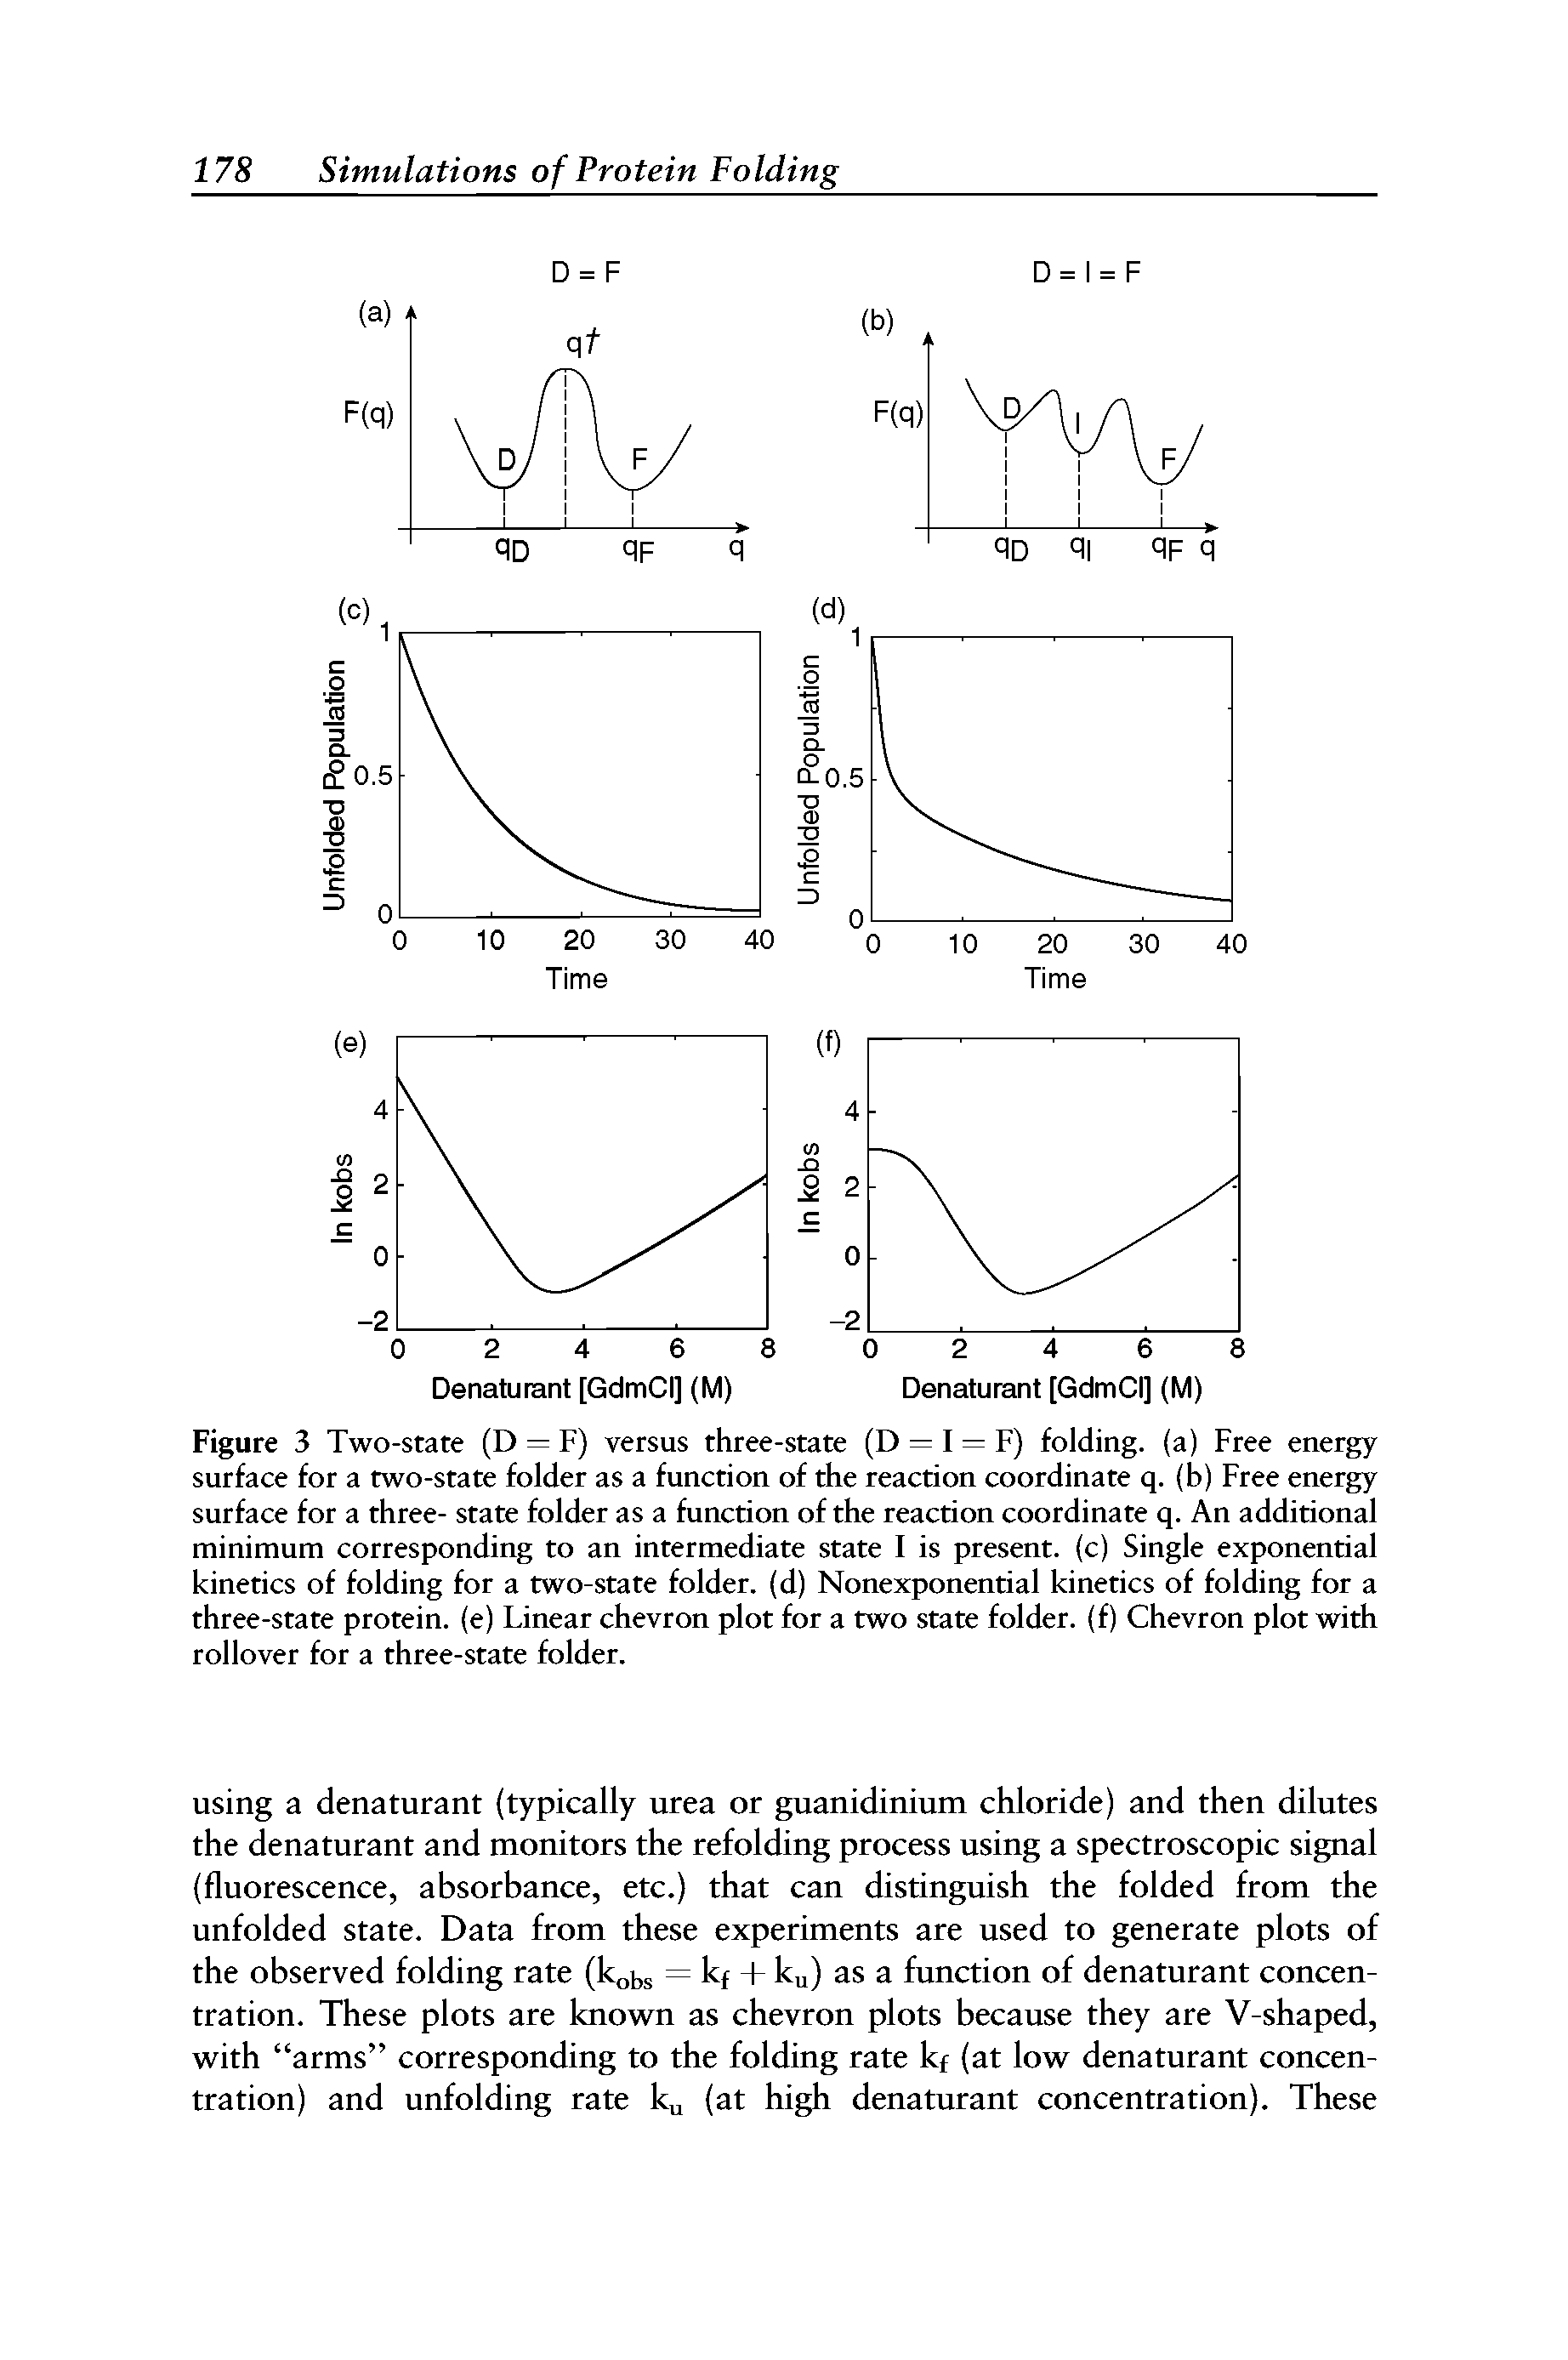 Figure 3 Two-state (D = F) versus three-state (D = I = F) folding, (a) Free energy surface for a two-state folder as a function of the reaction coordinate q. (b) Free energy surface for a three- state folder as a function of the reaction coordinate q. An additional minimum corresponding to an intermediate state I is present, (c) Single exponential kinetics of folding for a two-state folder, (d) Nonexponential kinetics of folding for a three-state protein, (e) Linear chevron plot for a two state folder, (f) Chevron plot with rollover for a three-state folder.